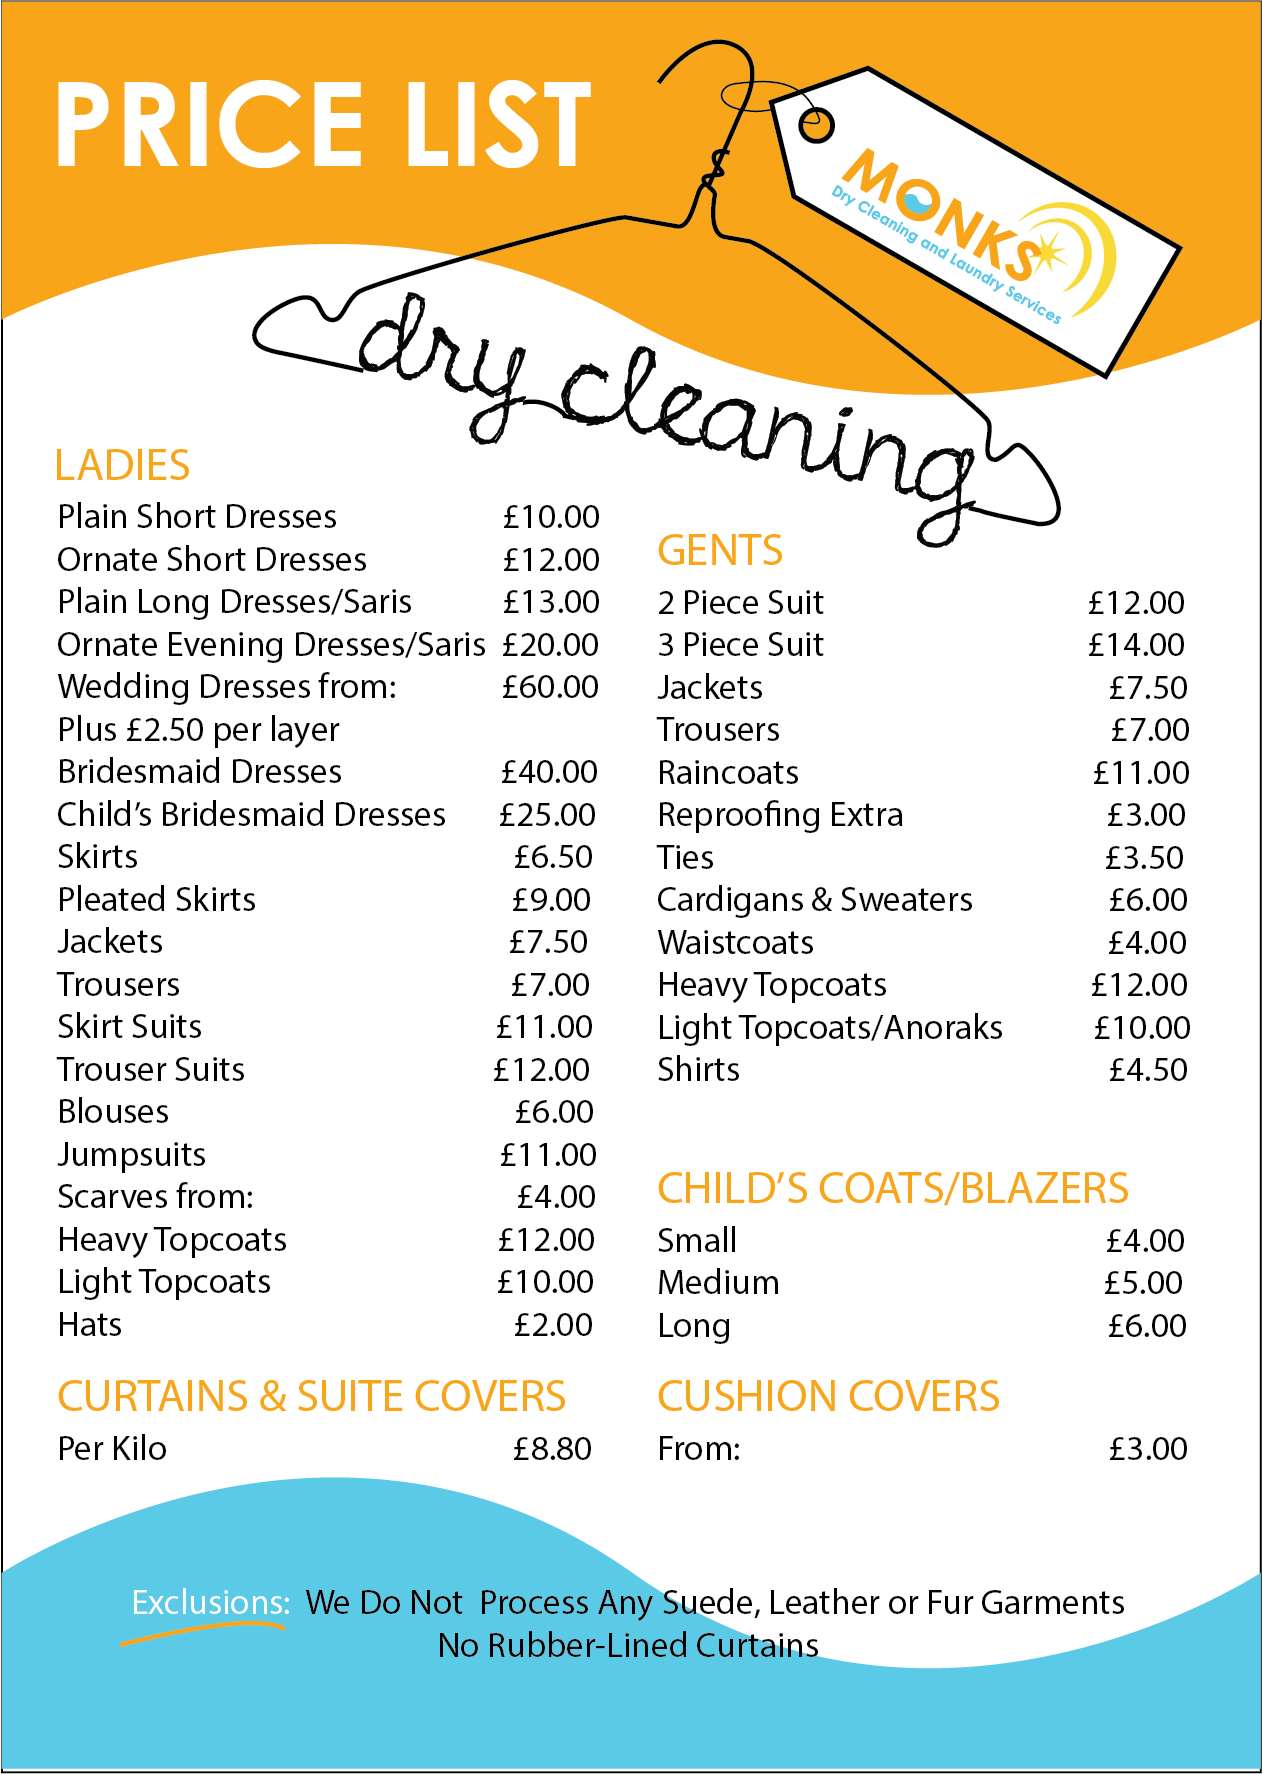 price-list-dry-cleaning-monks-dry-cleaning-and-laundry-services